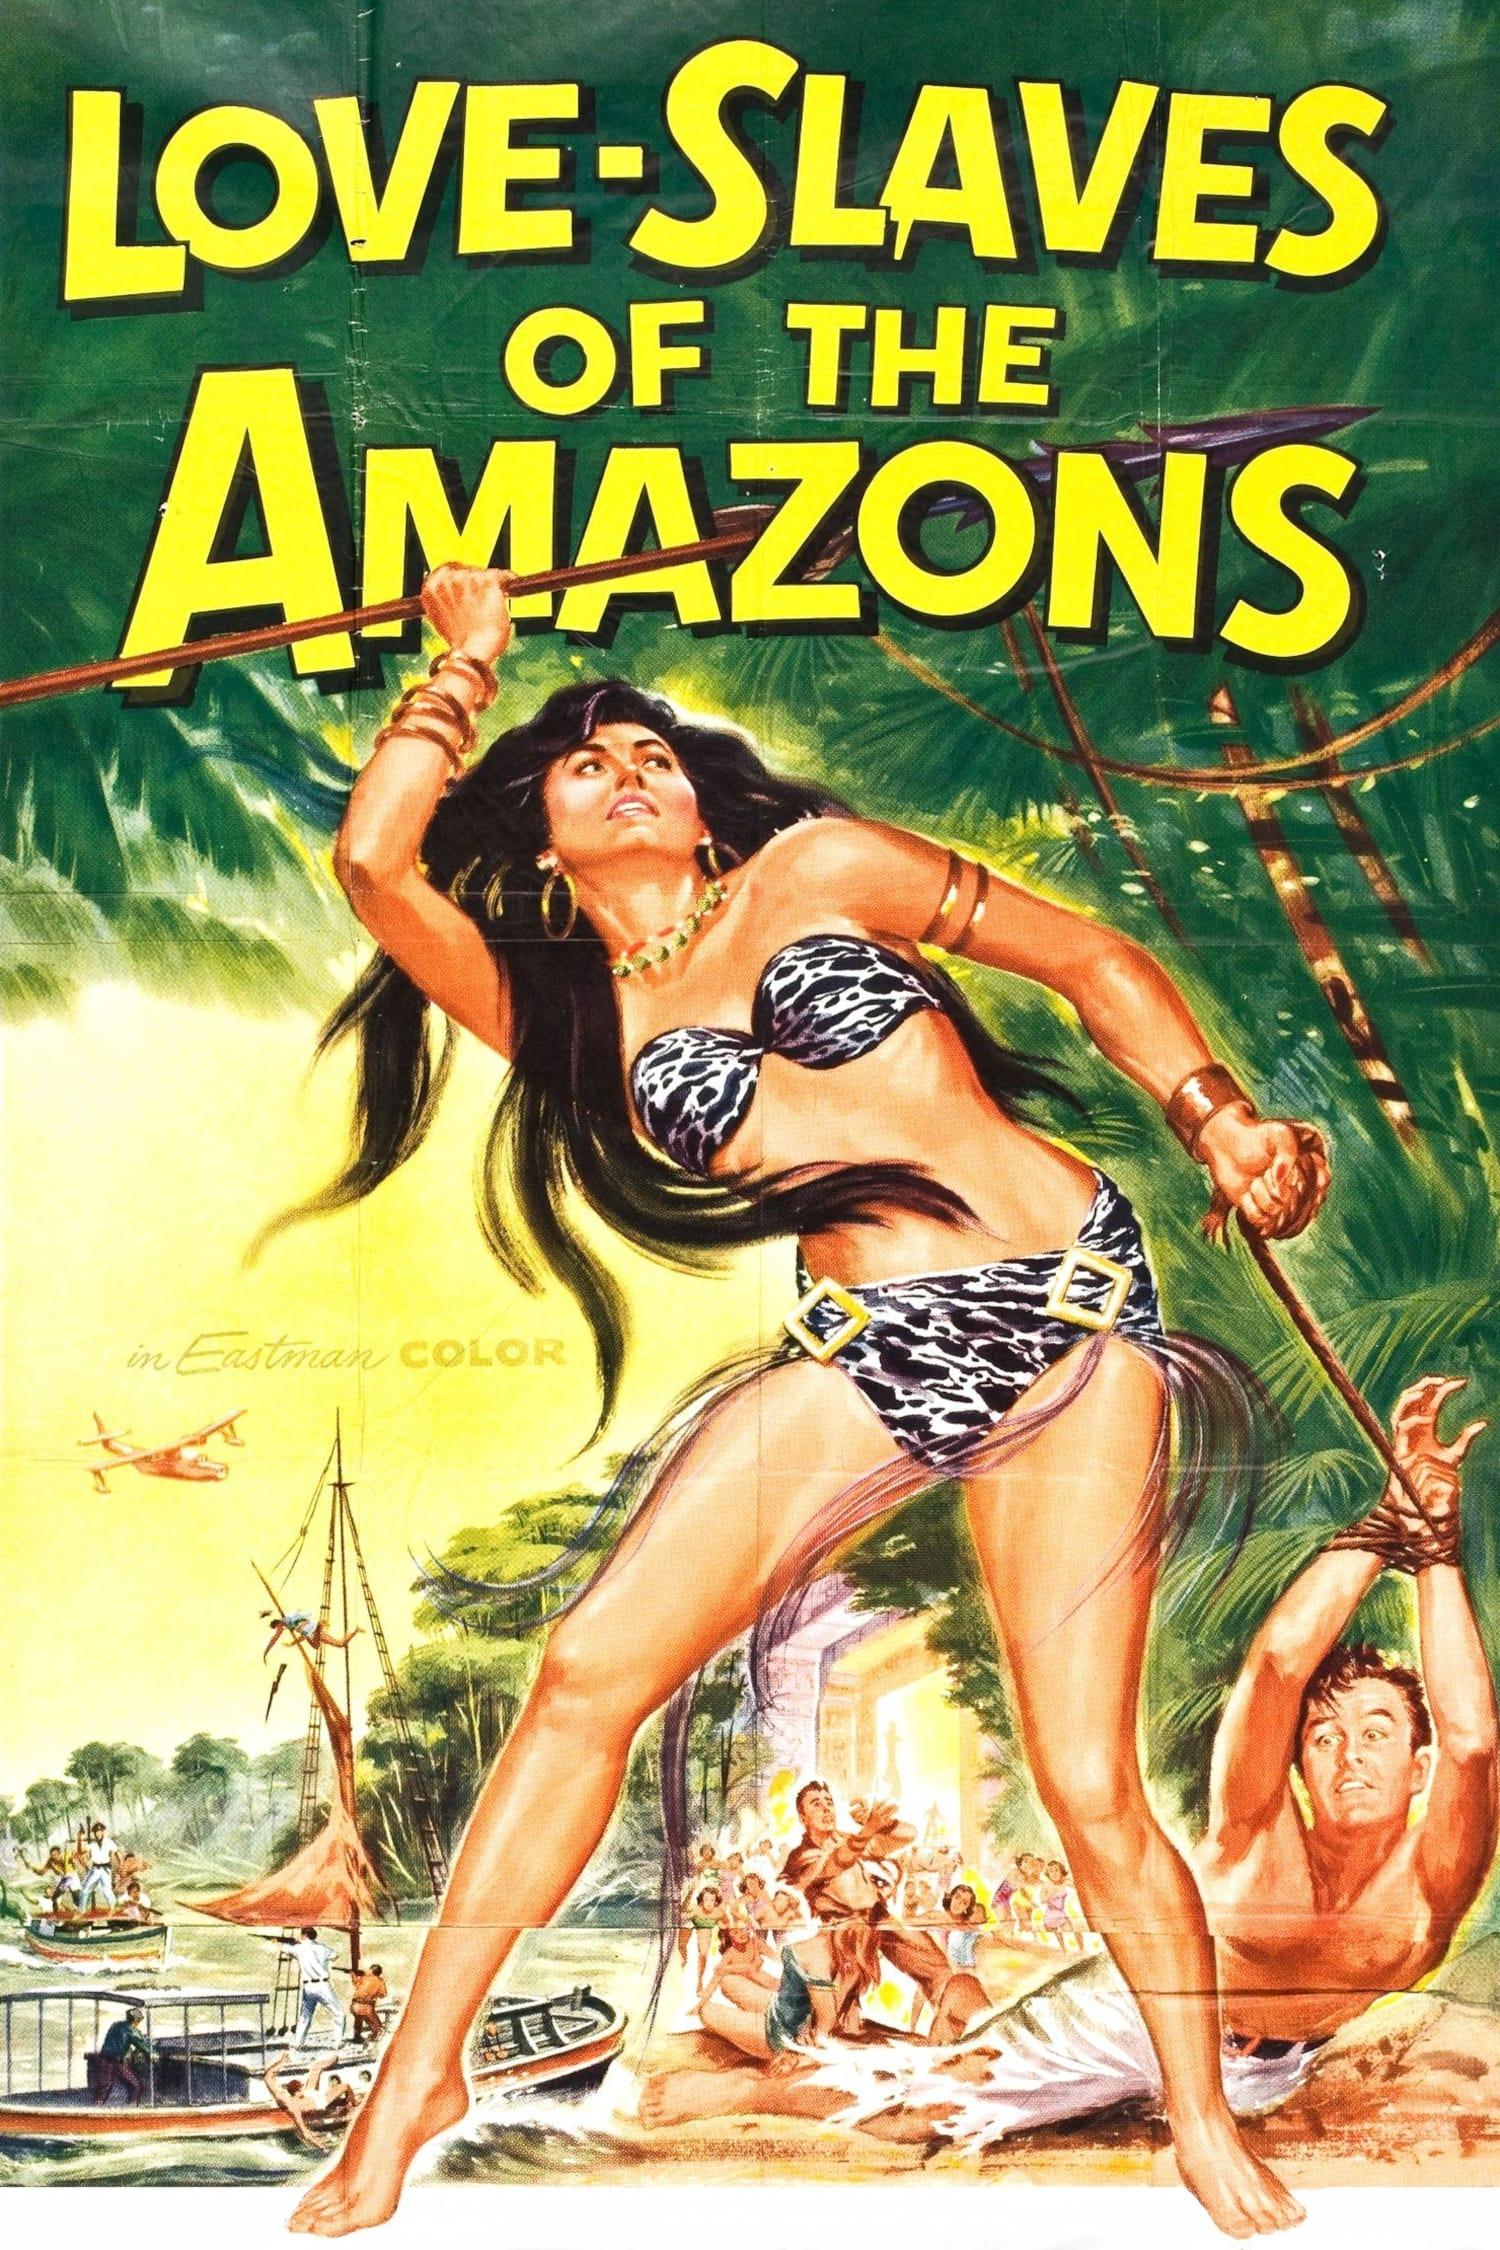 Love Slaves of the Amazons poster